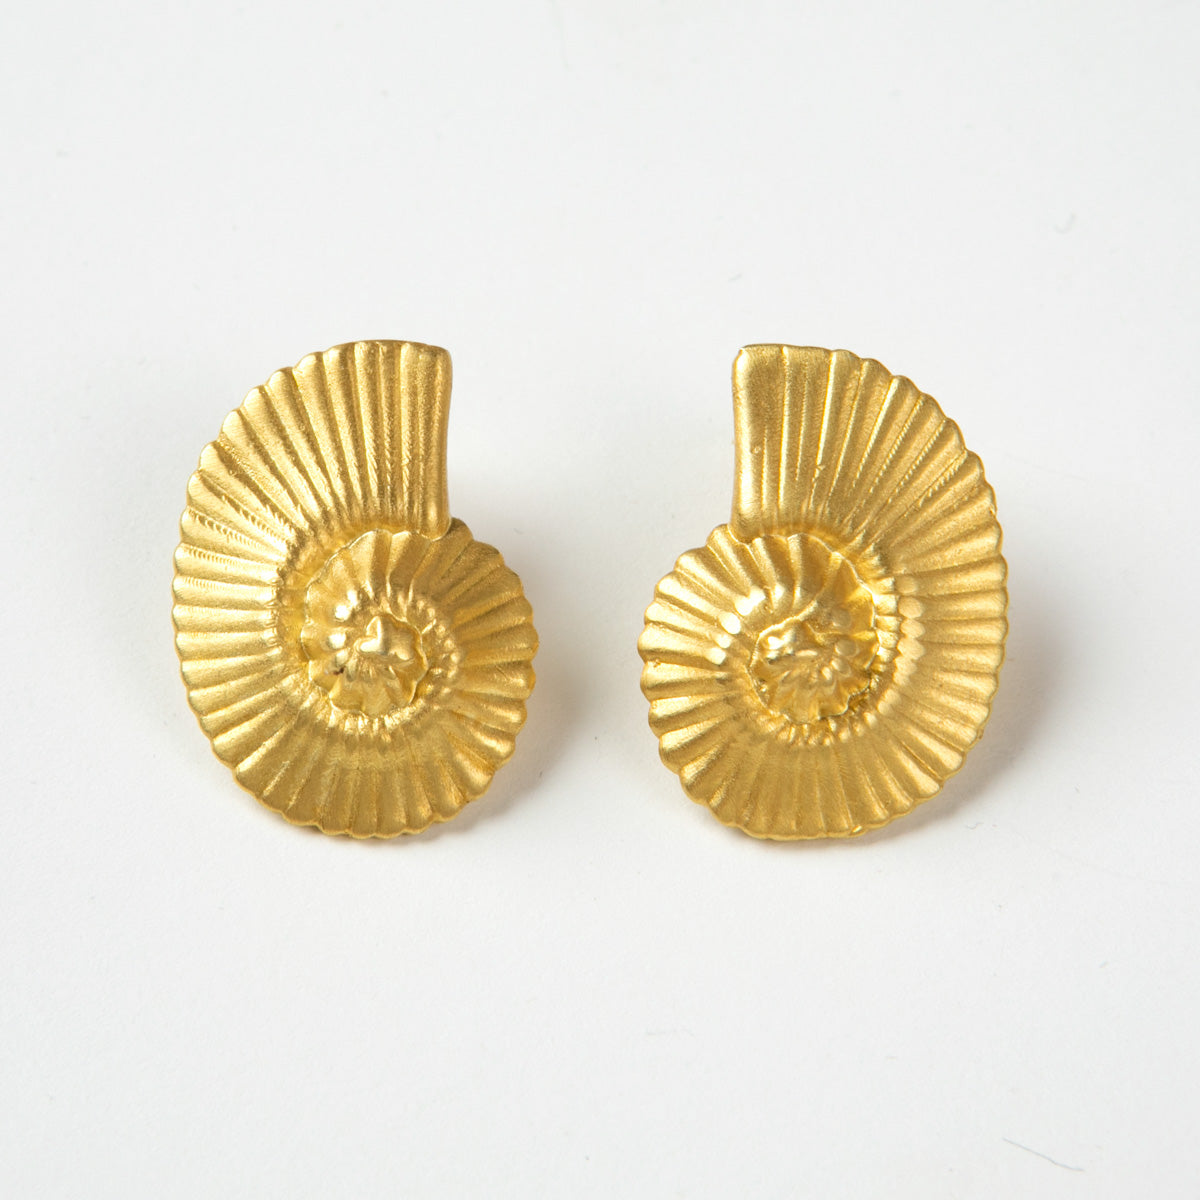 Electra earrings silver 925° gold plated 22k by Pearl Martini